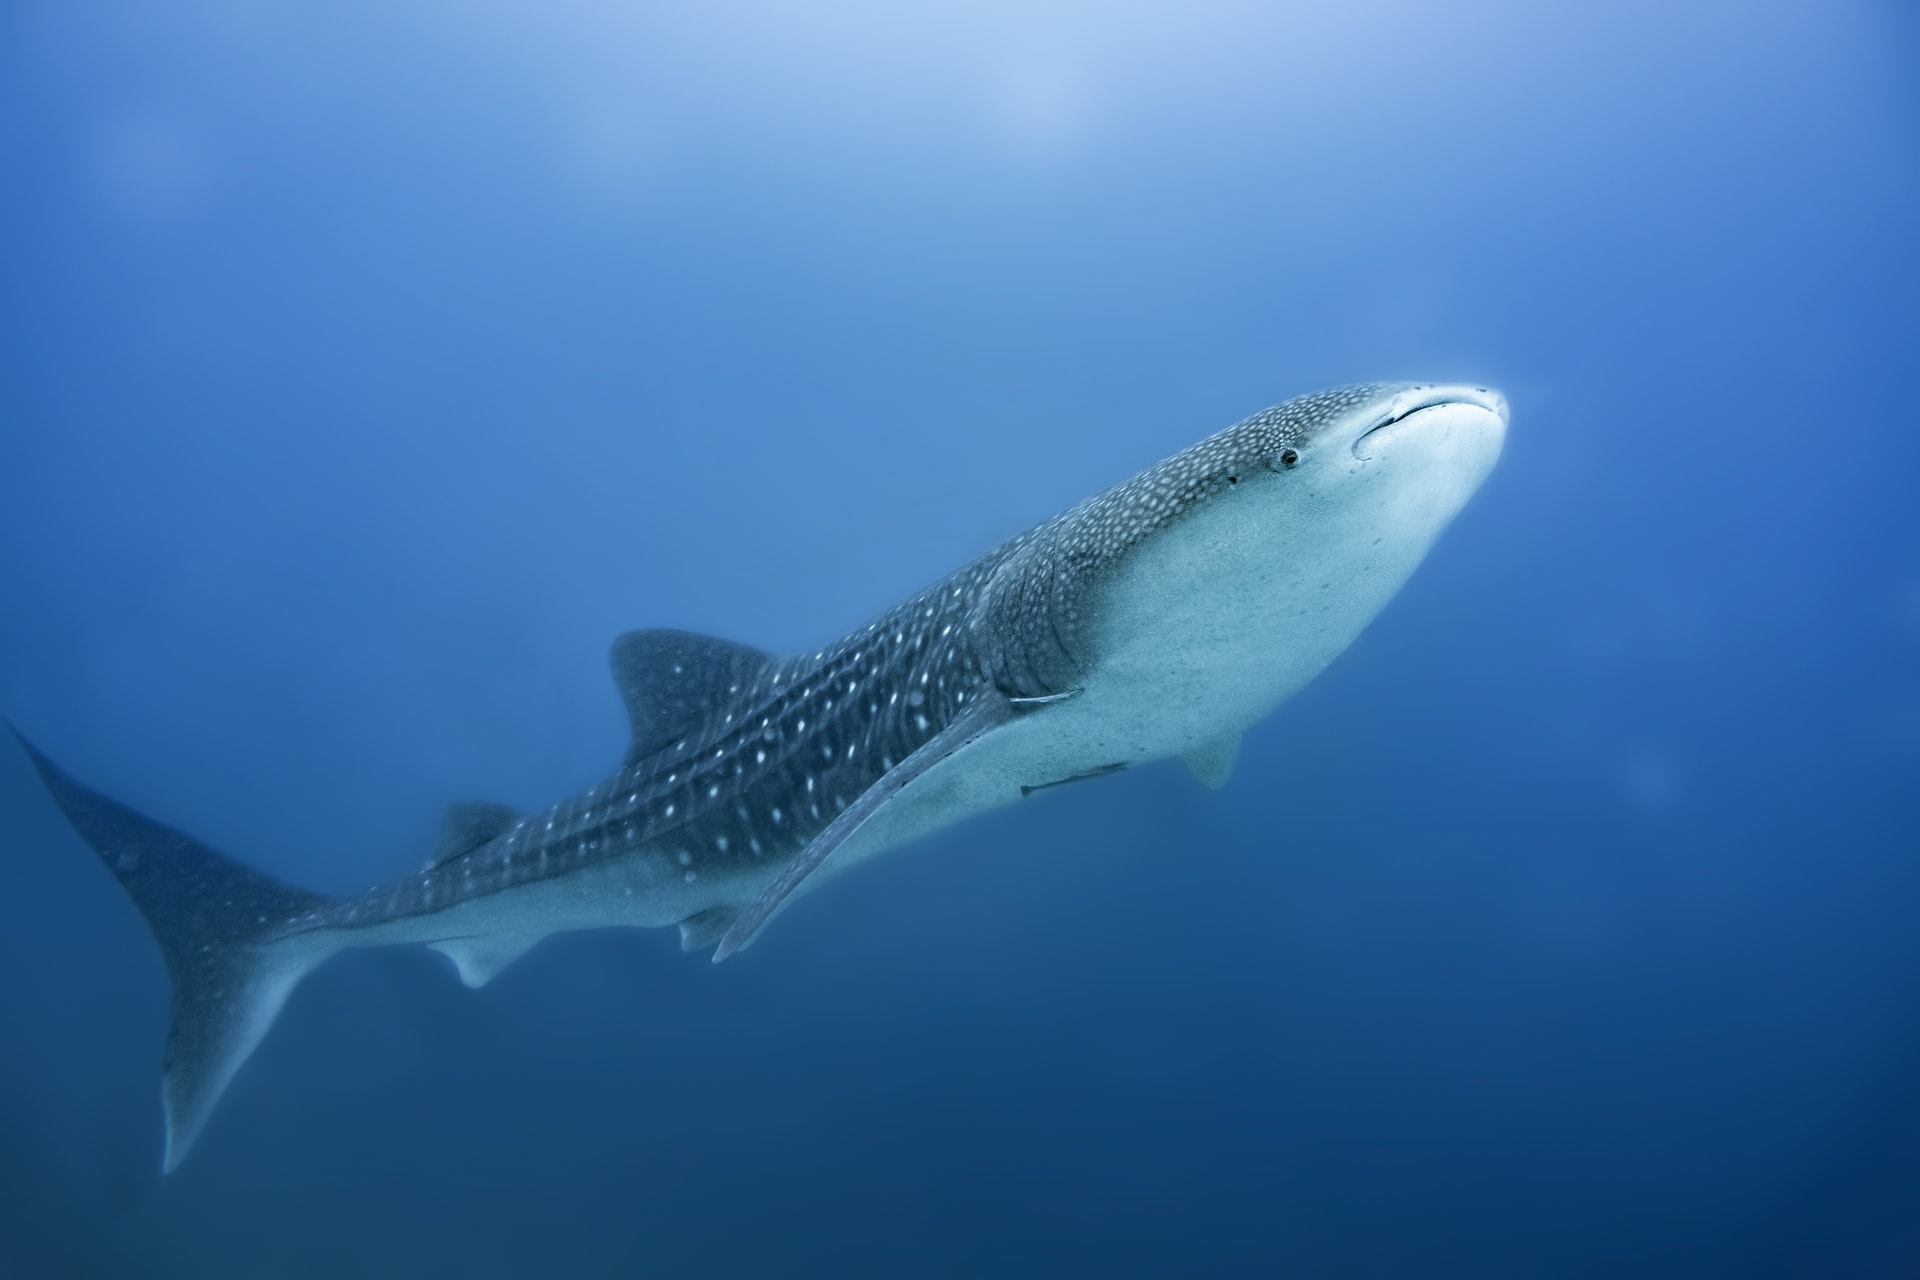 There is still a lot to learn about the life cycle of a whale shark. Here is what we do know. Whale sharks are ovoviviparous—females lay eggs, but they develop inside her body. A study showed that it is possible for whale sharks to have several litters from one mating. Whale shark pups are about 2 feet long when born. Scientists are not sure precisely how long whale sharks live, but based on their large size and their age at first reproduction (around 30 years old for males) it is thought that whale sharks may live at least 100–150 years.